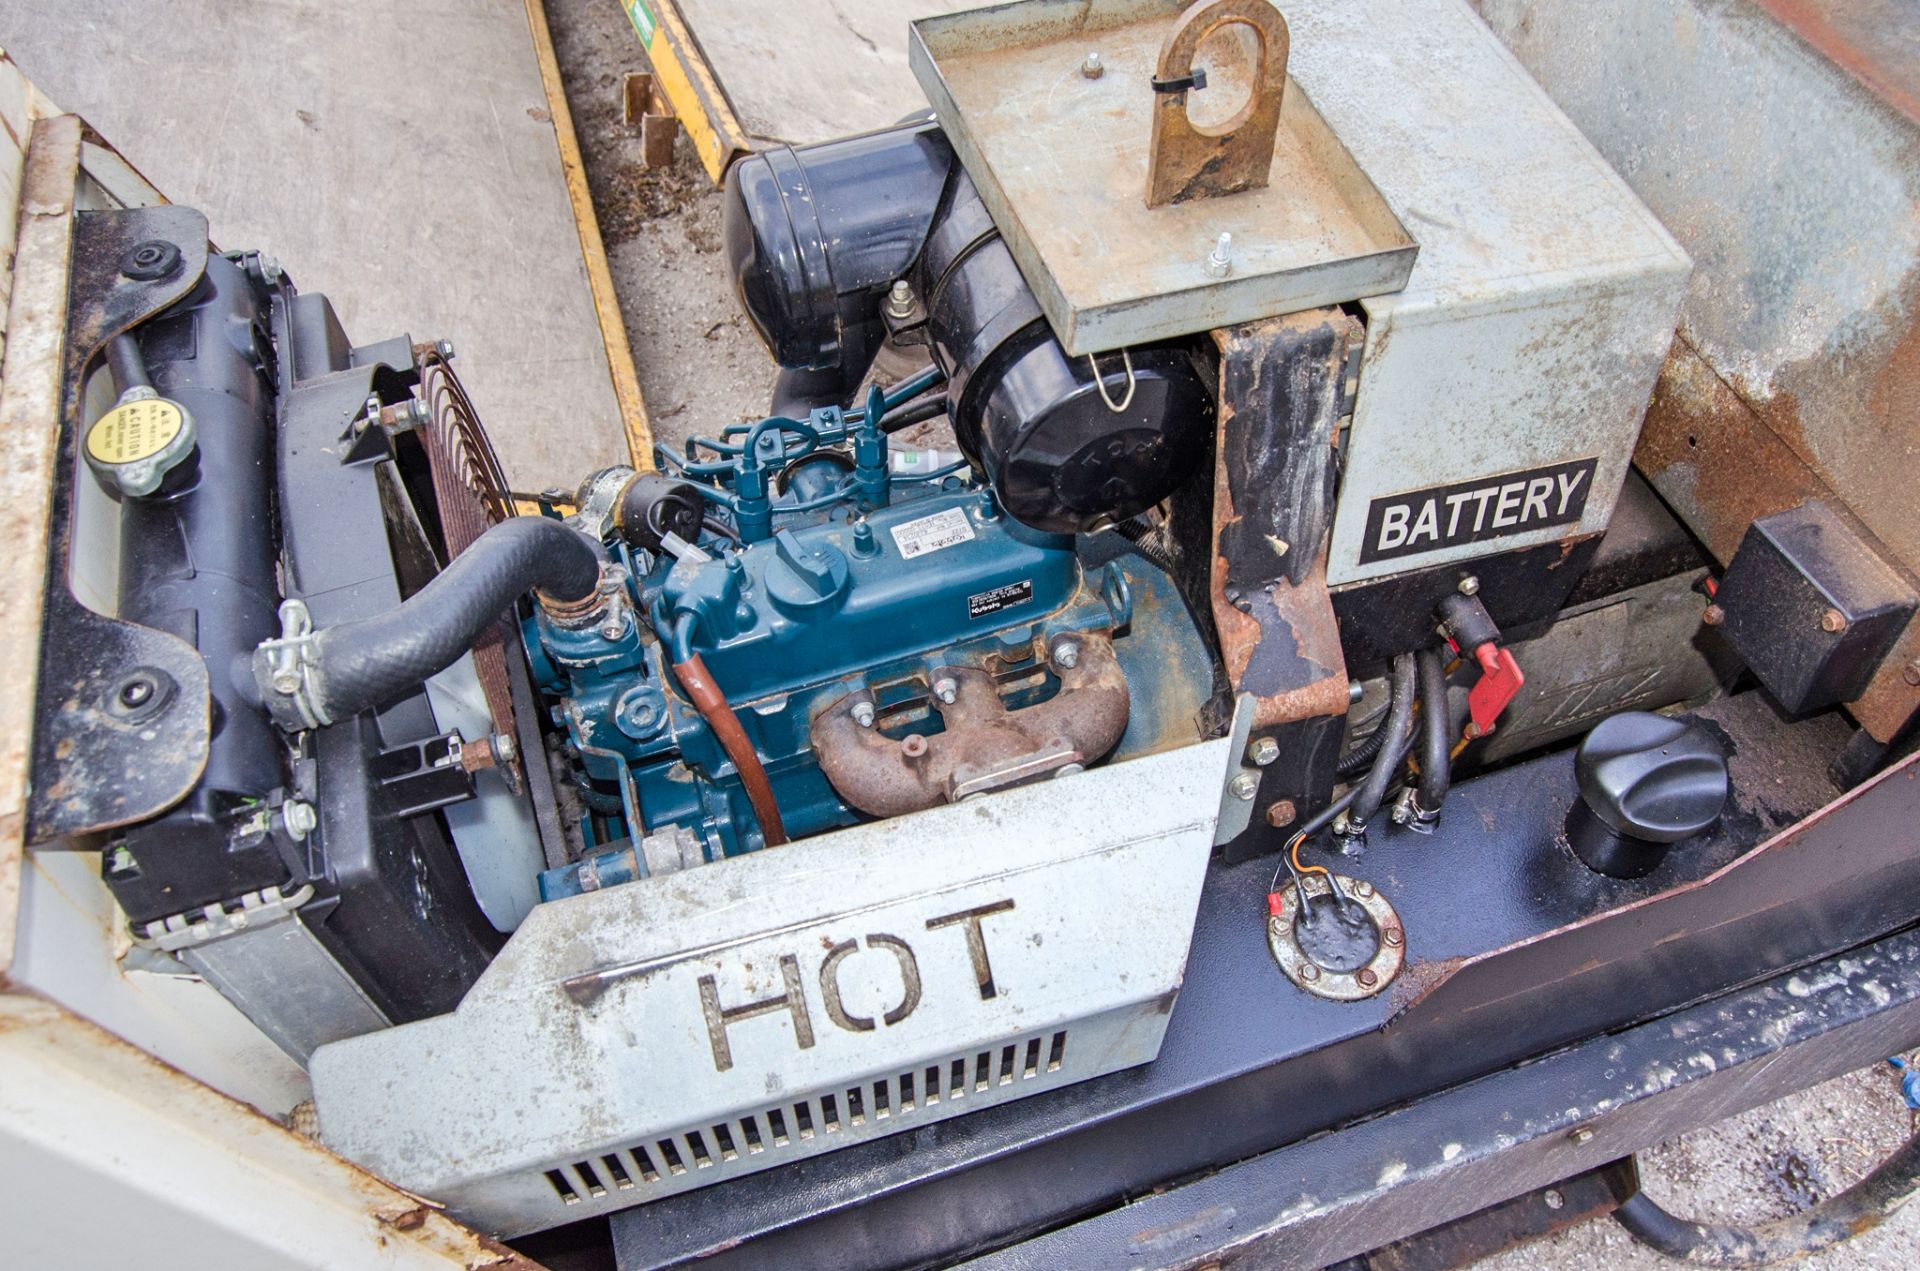 MHM MG10000 SSK-V 10 kva diesel driven generator S/N: 229180097 Recorded hours: 3997 A978356 - Image 5 of 5